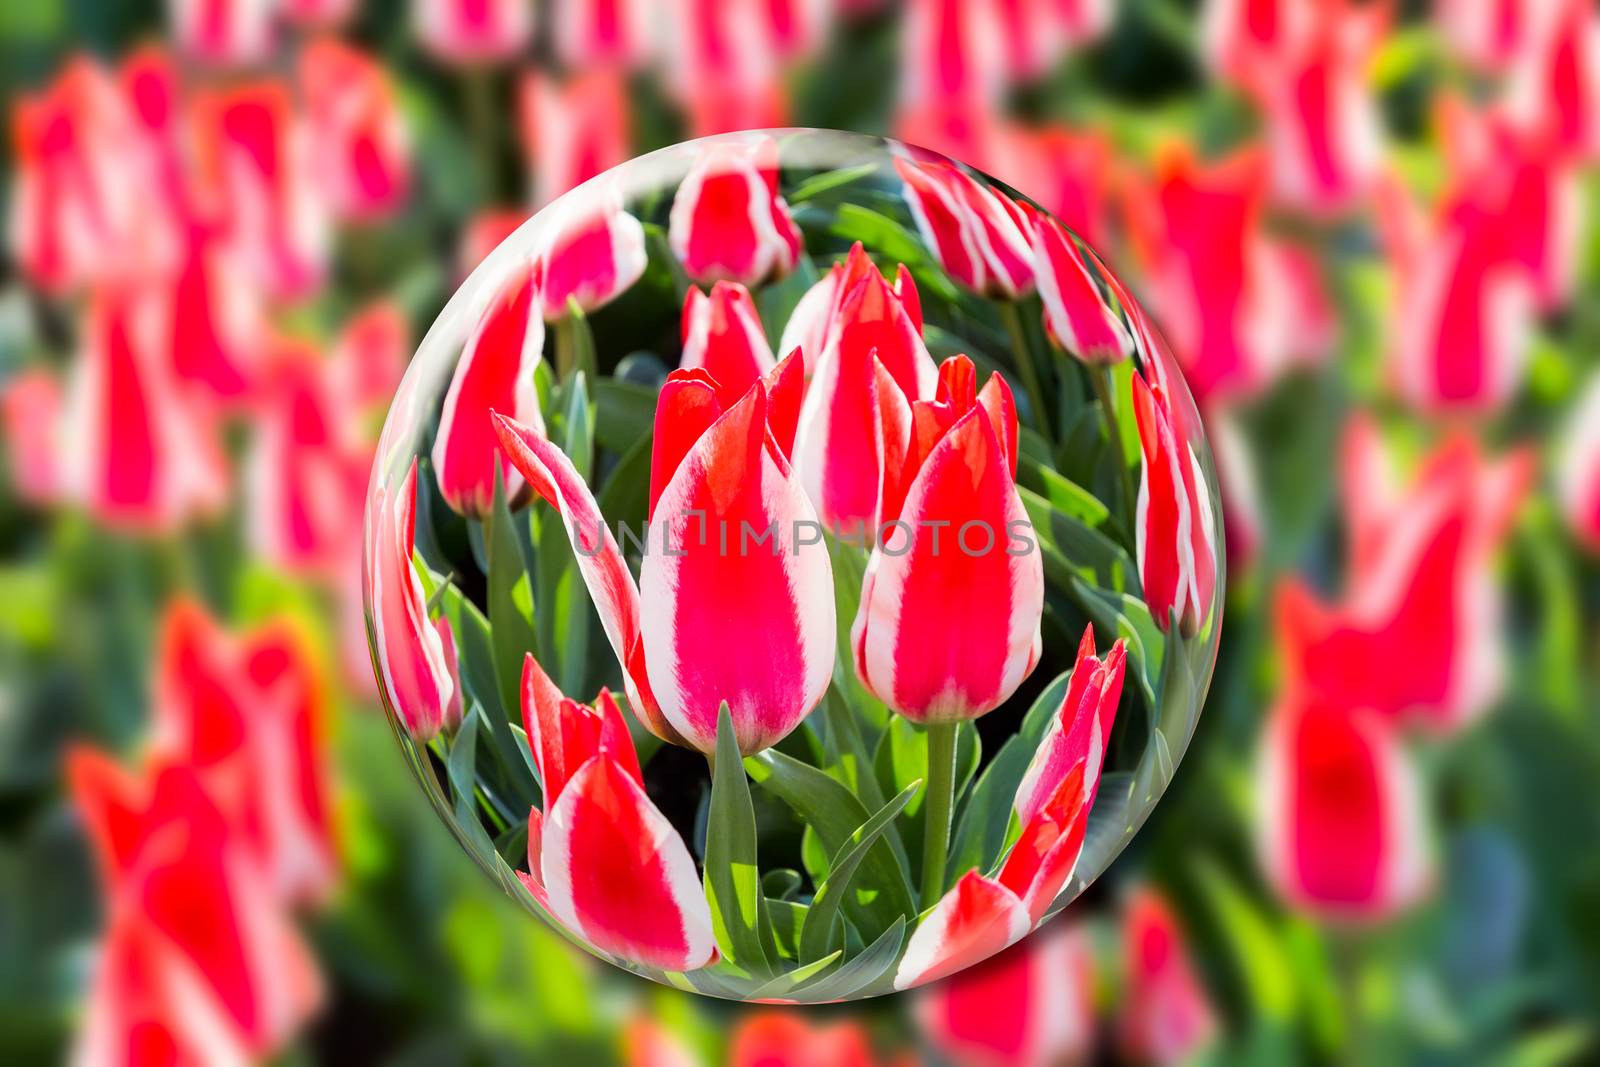 Crystal ball with red-white tulips in flowers field by BenSchonewille